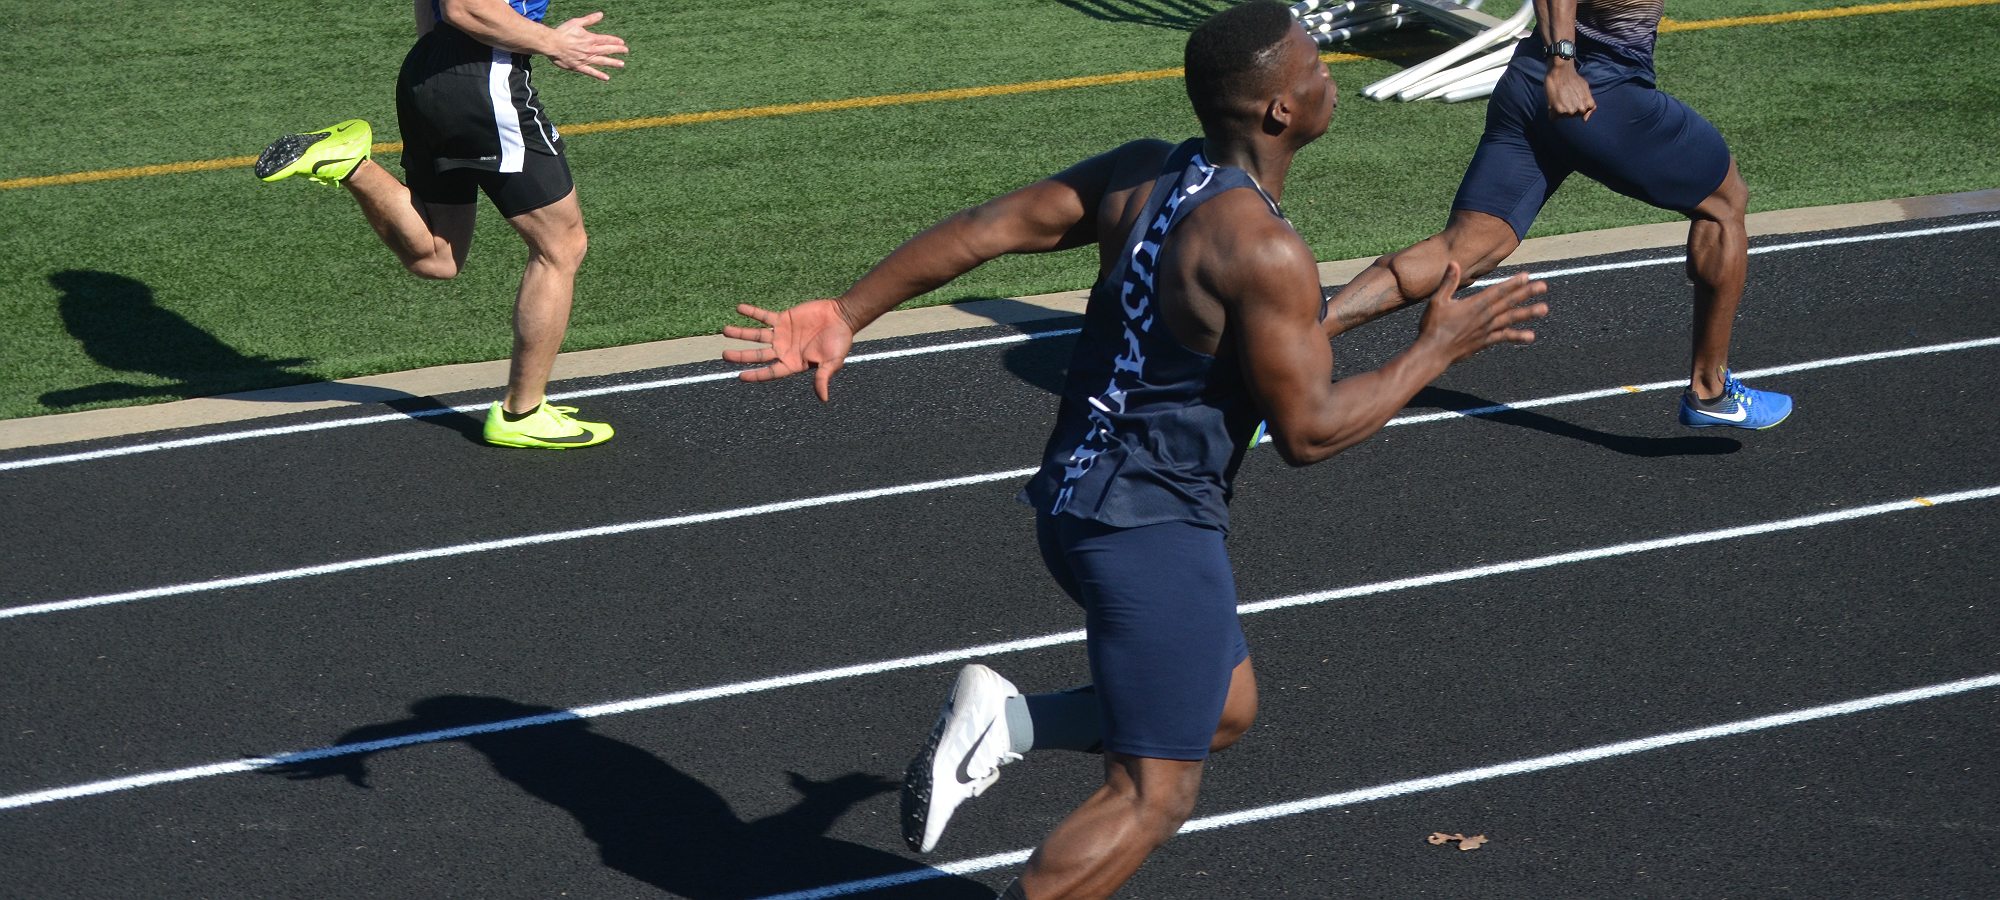 Men's Track and Field Results at Marc Randle Classic